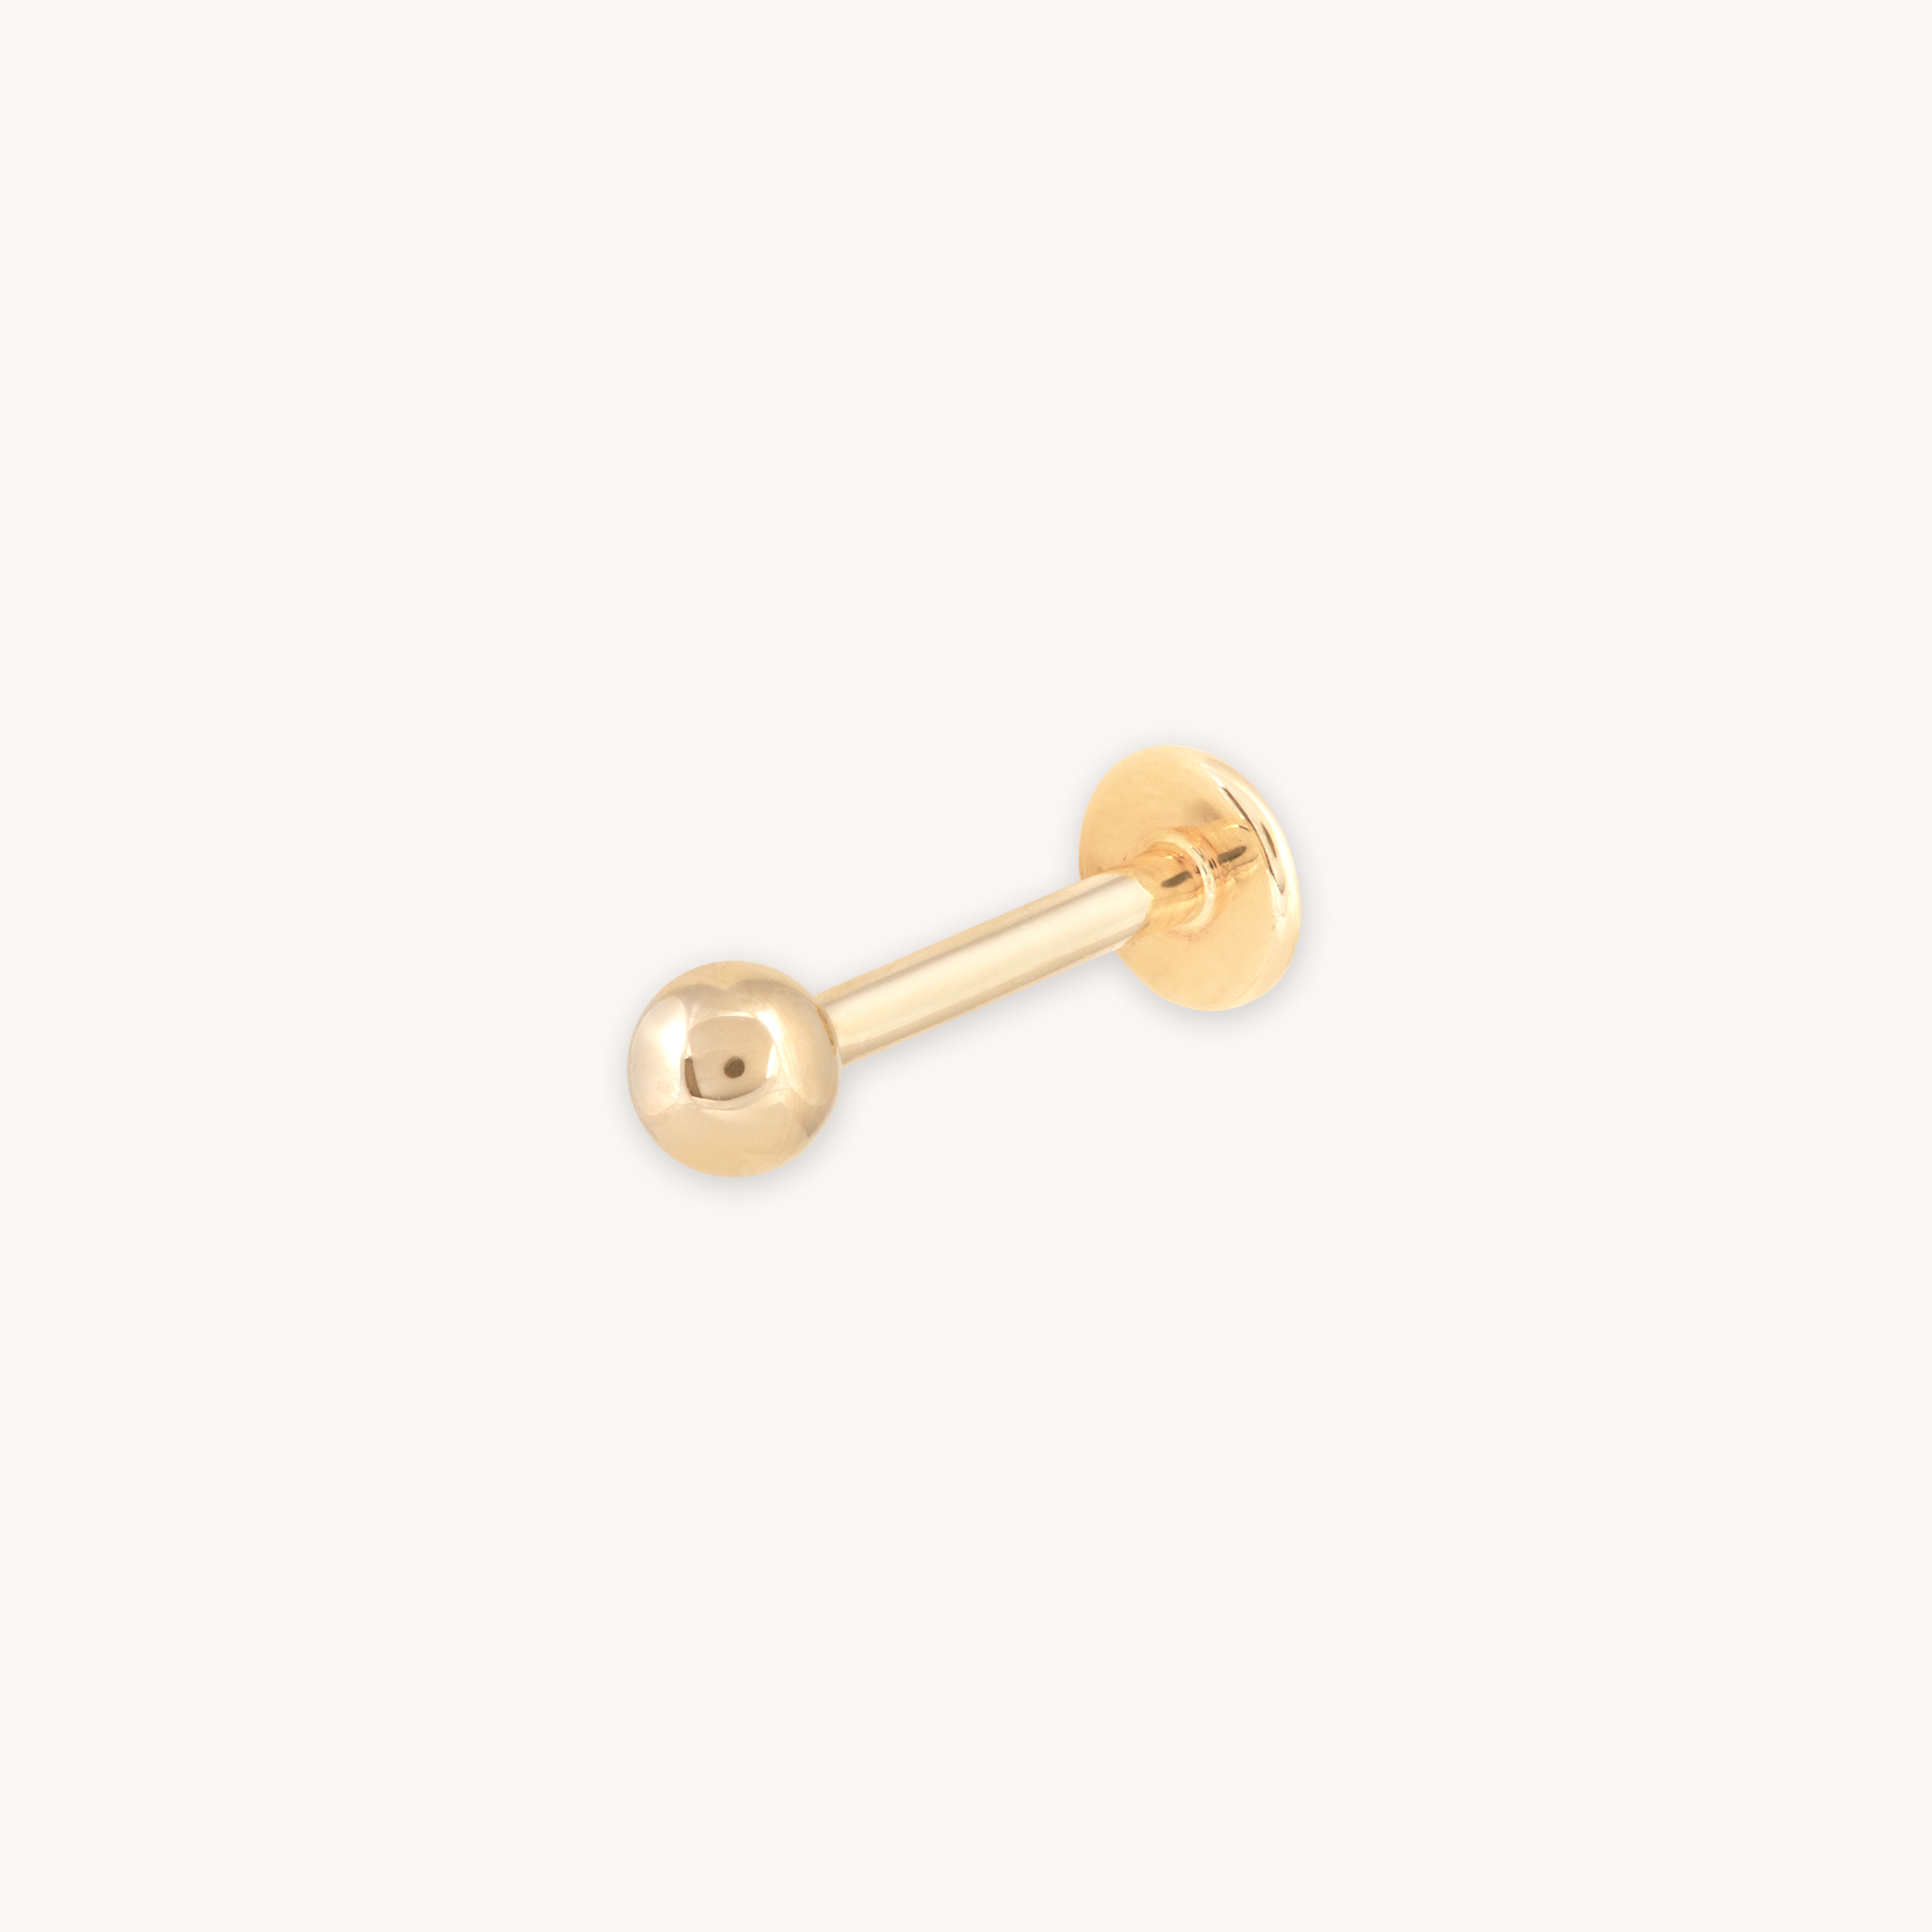 SOLID GOLD LARGE BALL PIERCING STUD CUT OUT